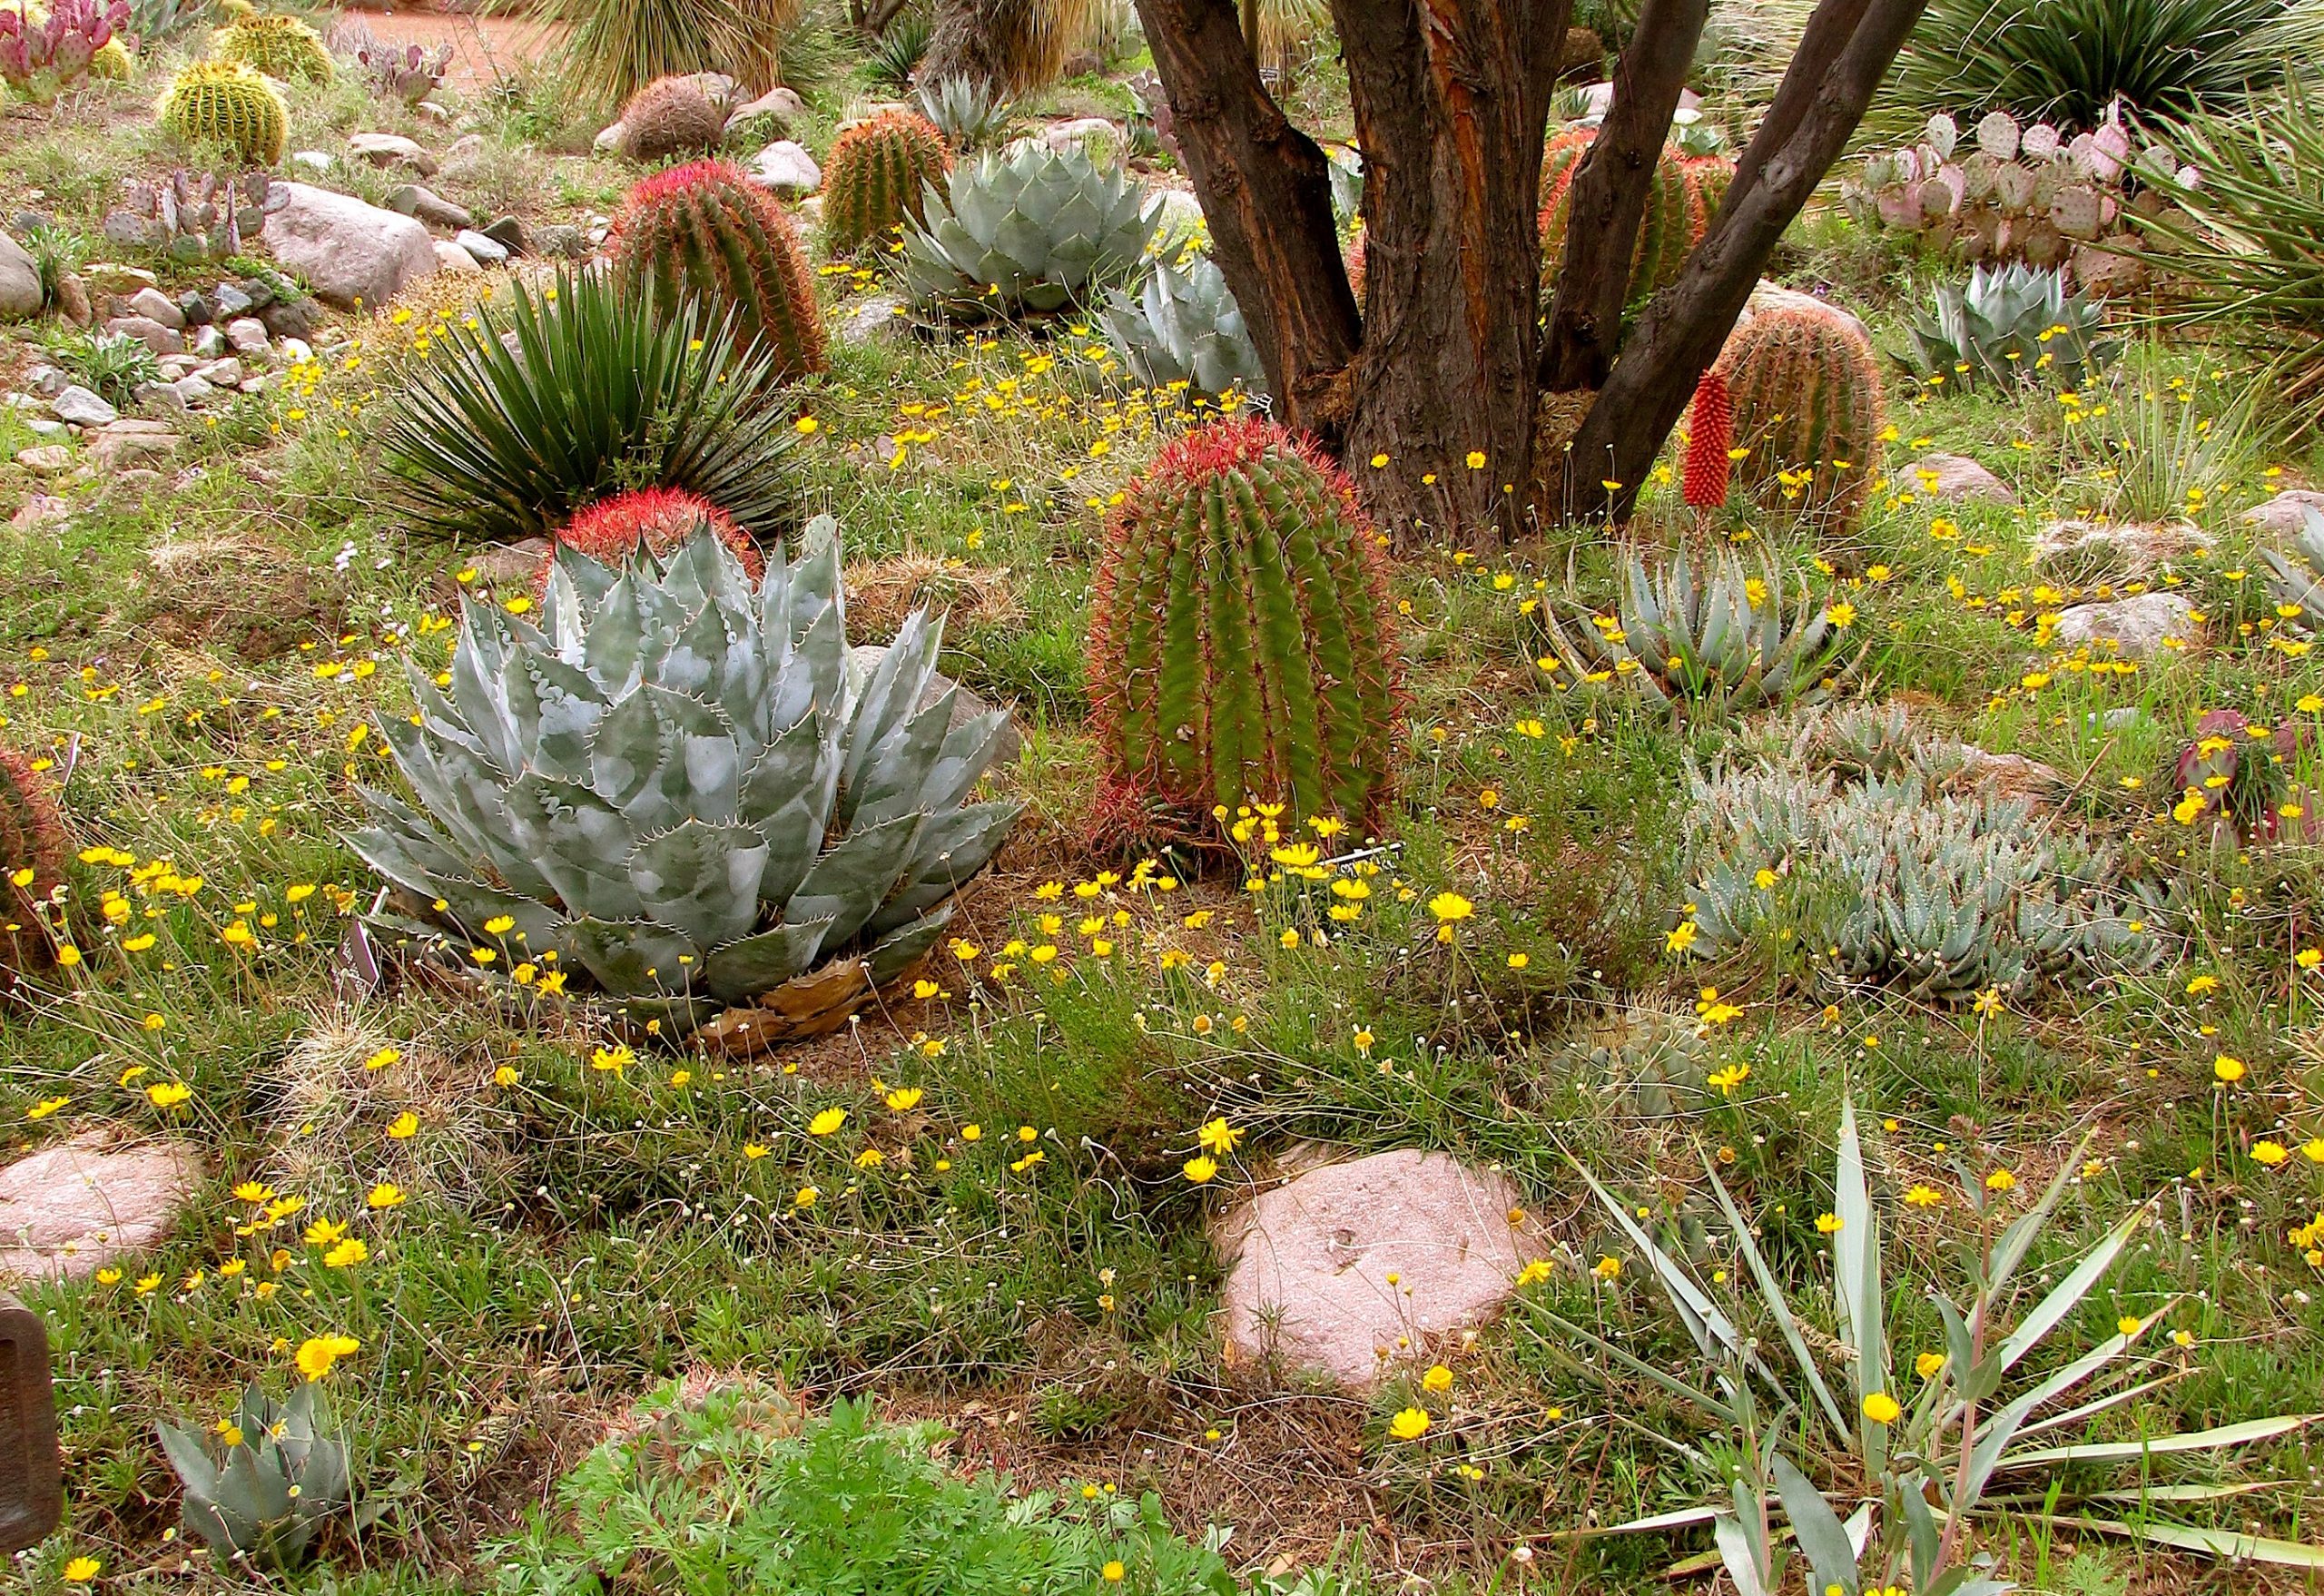 desert plant scene with cactus, flowers, and trees